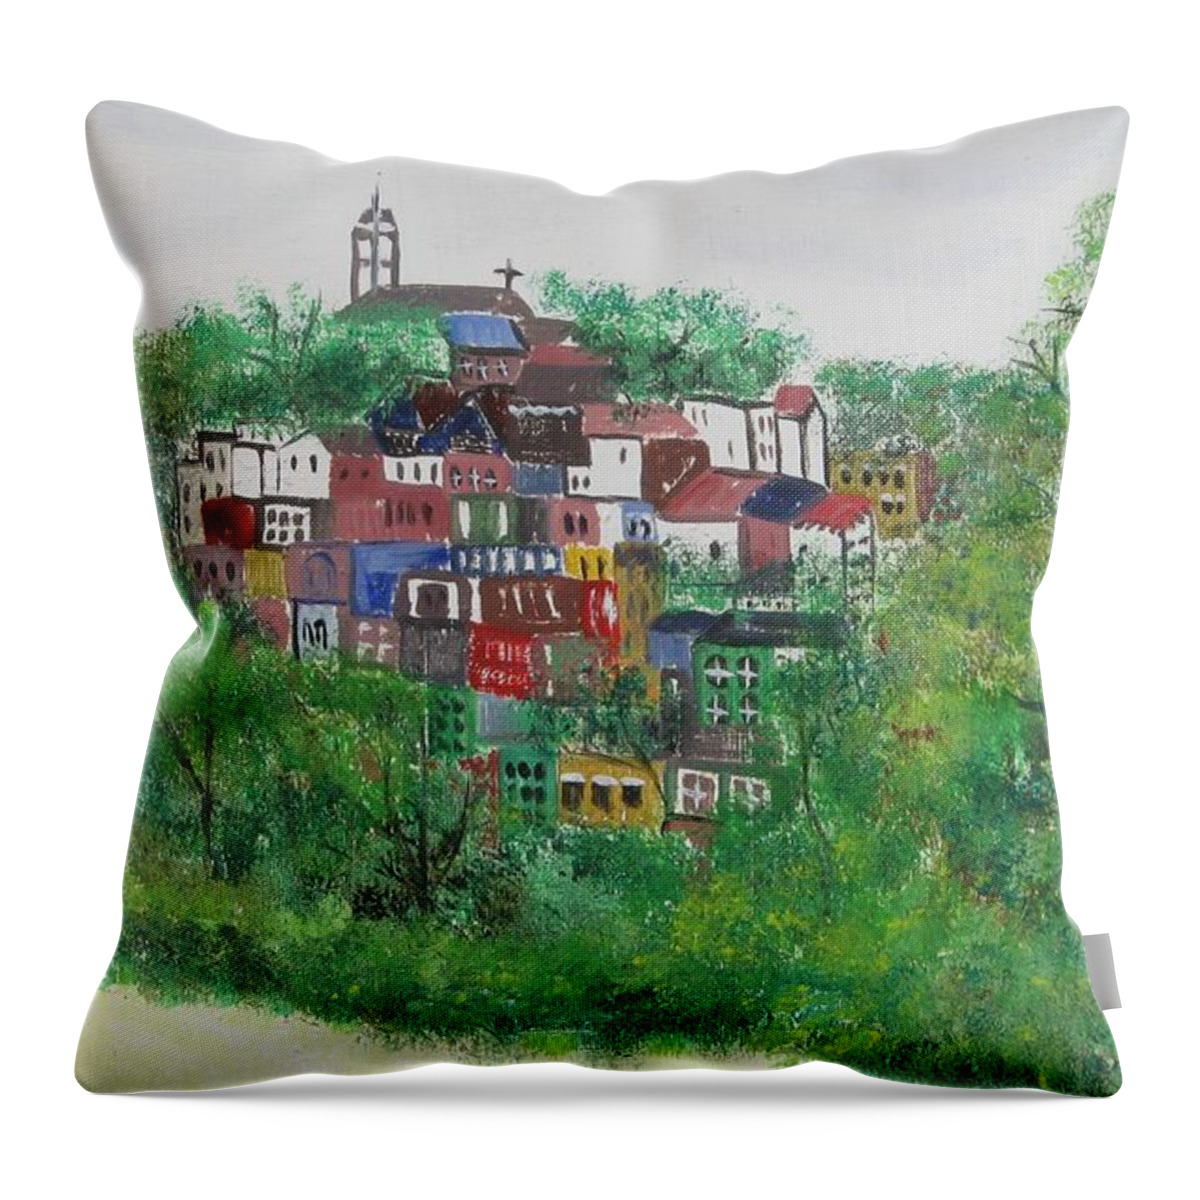 New England Village Throw Pillow featuring the painting Sleepy Little Village by Diane Pape